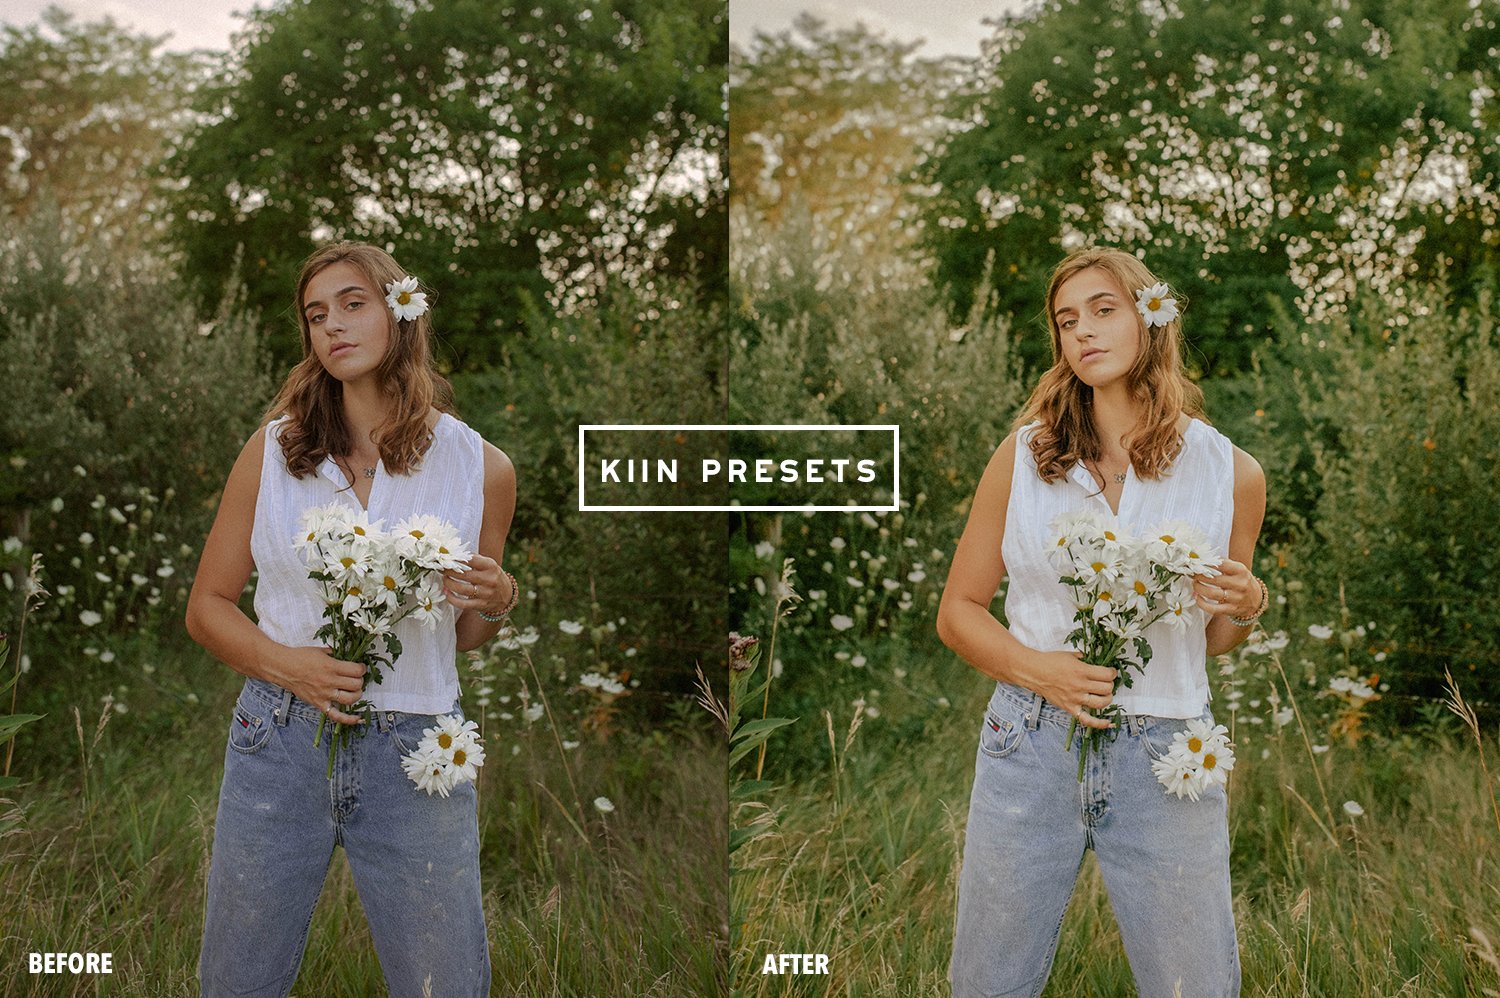 03kiin lightroom presets outdoor presets outdoor filter farm presets blogger filter cottagecore presets country aesthetic presets family presets 172